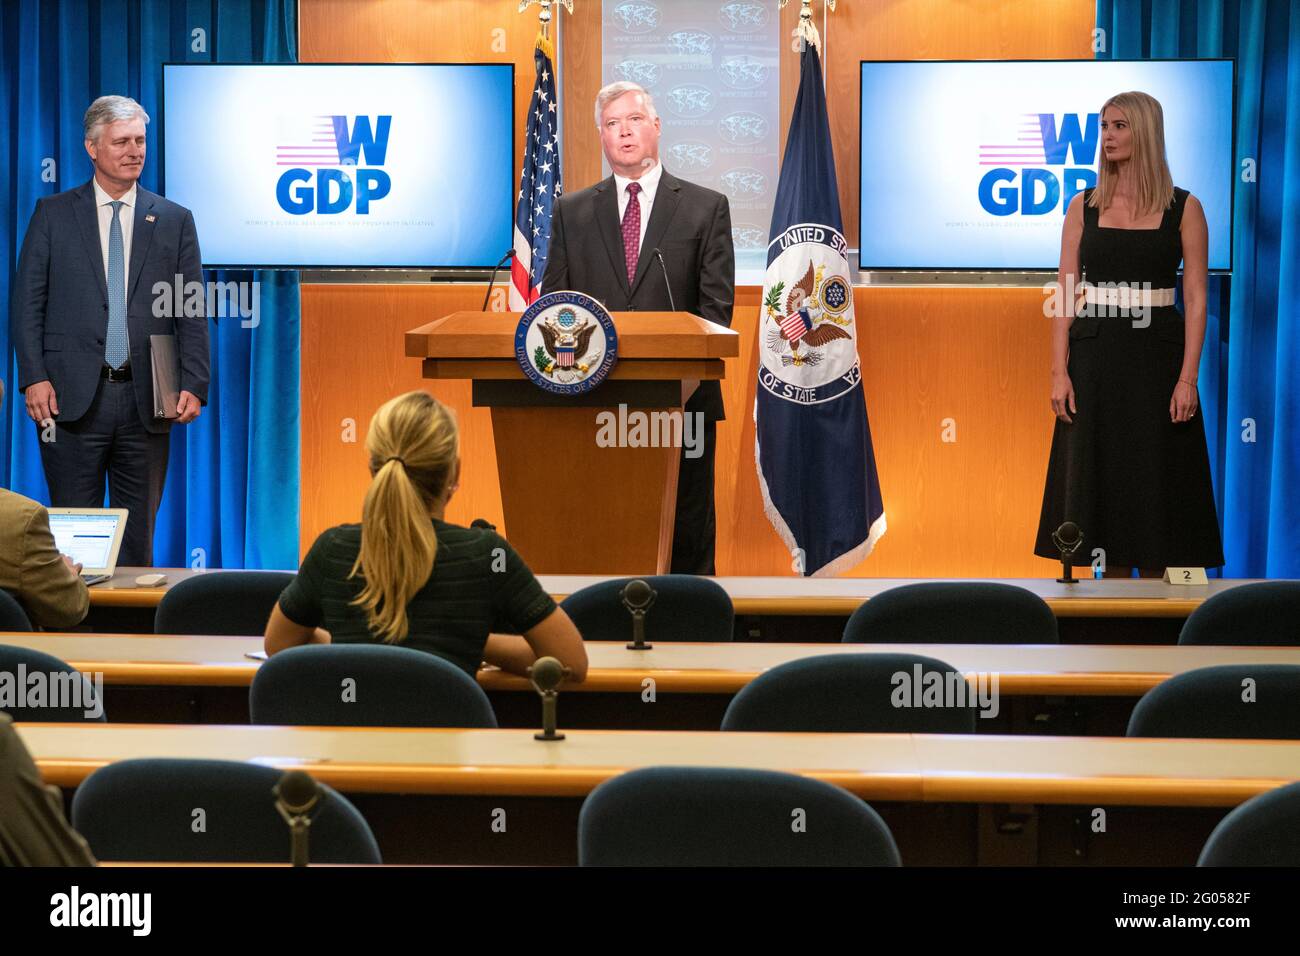 Deputy Secretary of State Stephen Biegun, with Advisor to the President Ivanka Trump and National Security Advisor Robert O’Brien, delivers remarks at the Women's Global Development and Prosperity initiative virtual event on August 11, 2020 Stock Photo